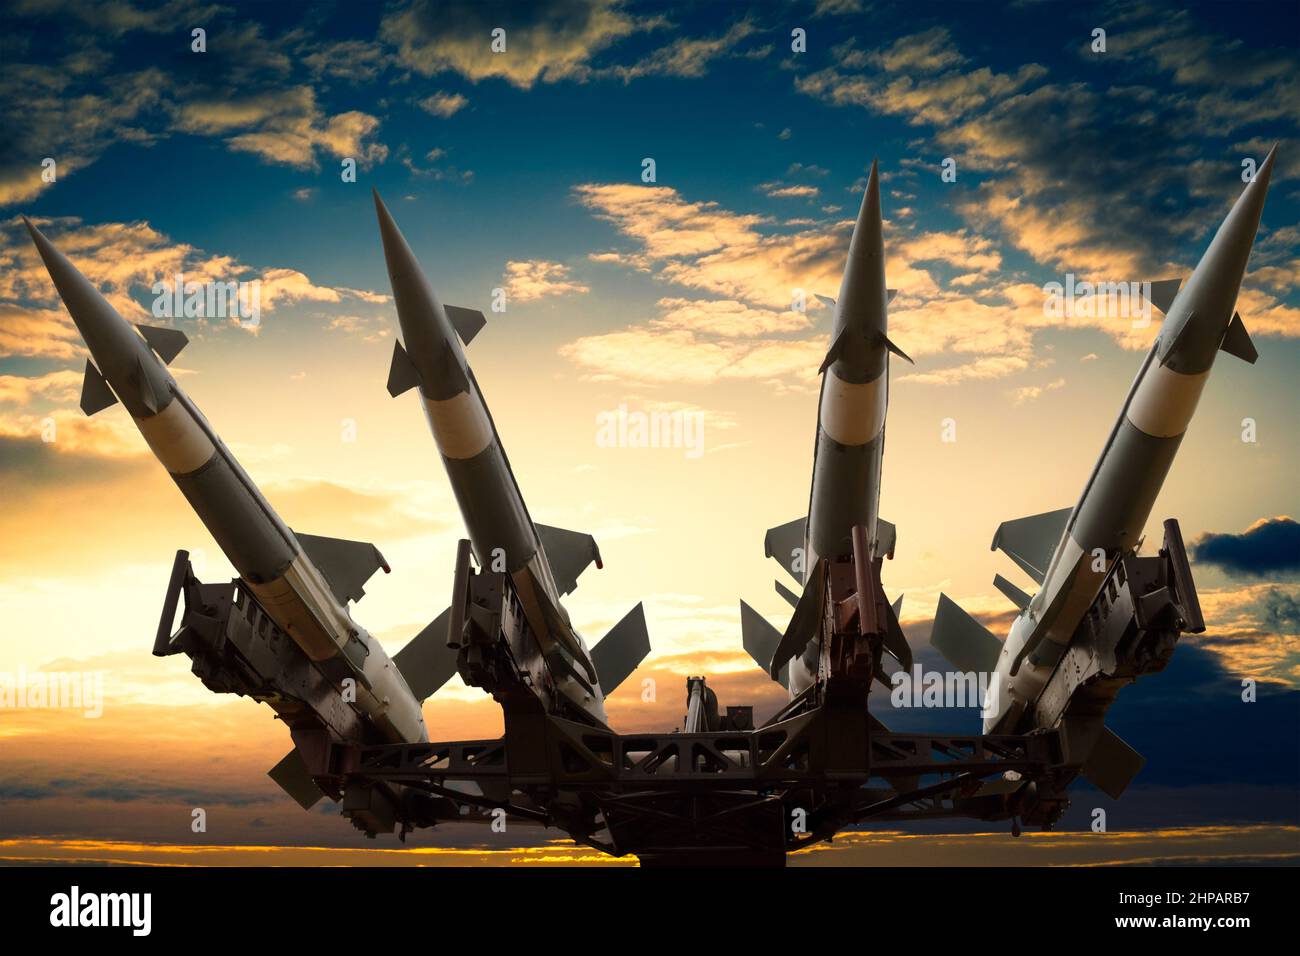 Radom, Mazowieckie, Poland - August 23th, 2015: Anti-aircraft cruise missles on a launcher, dramatic sky Stock Photo